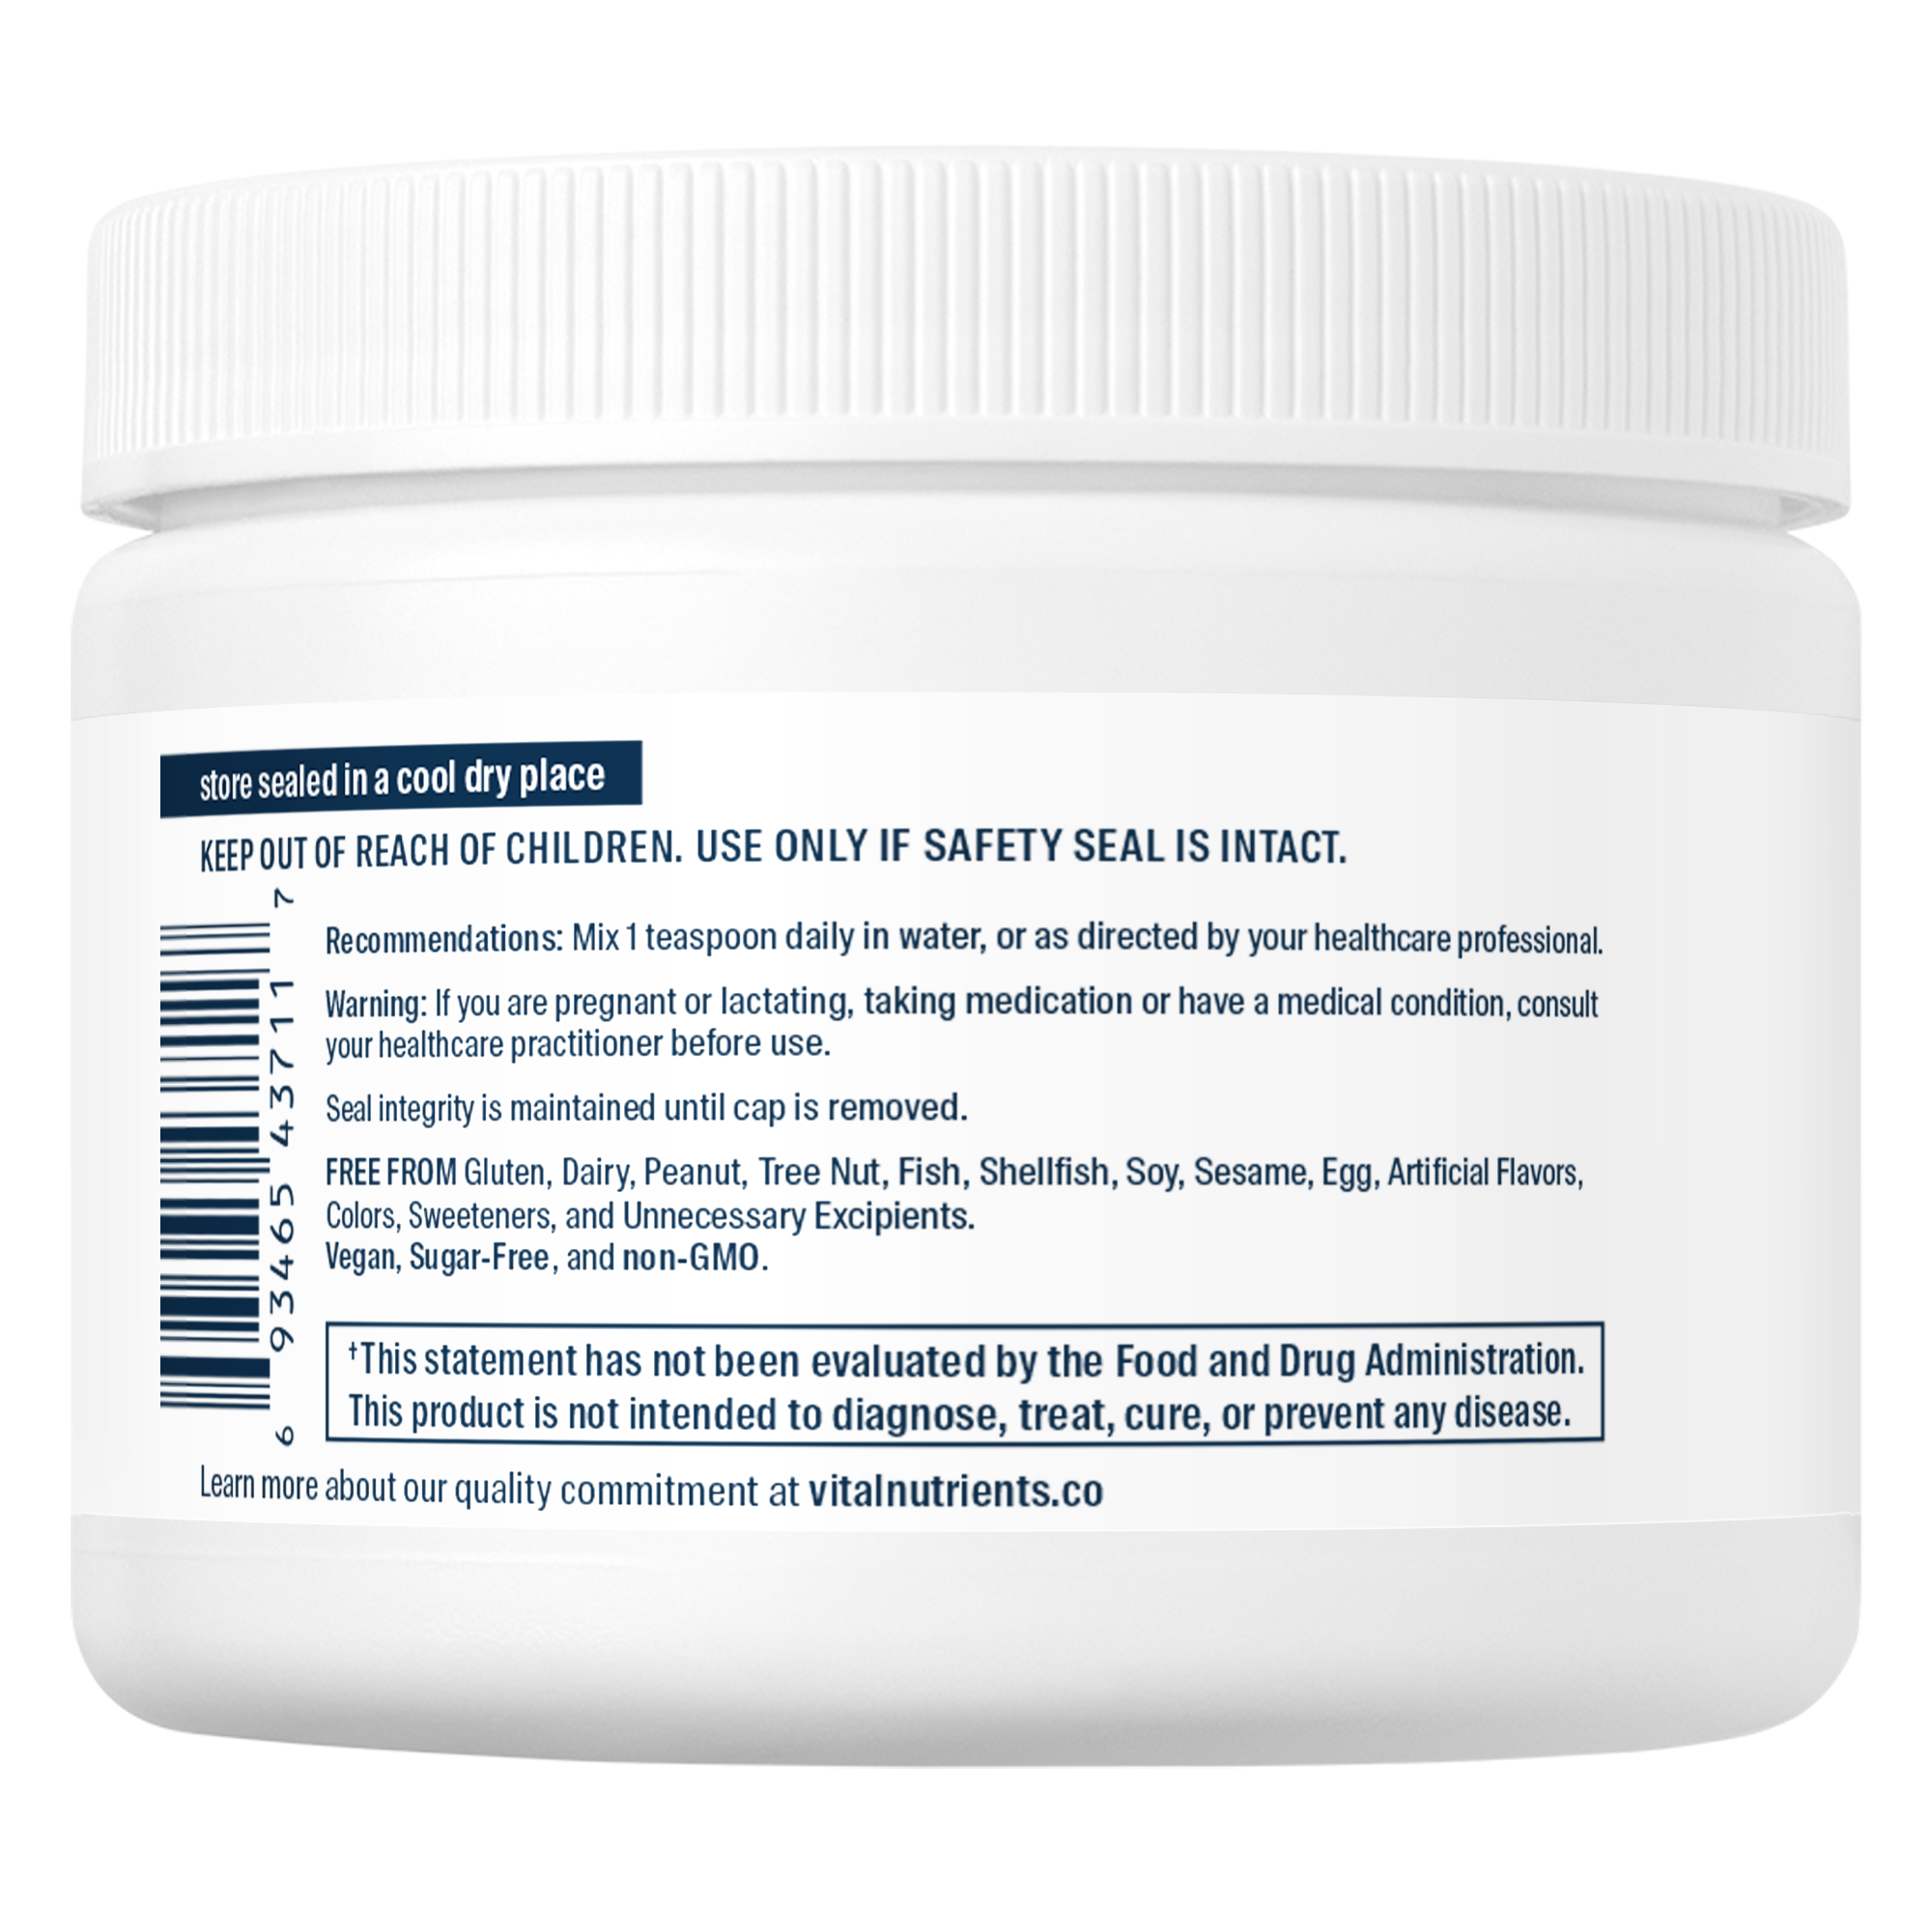 Mannose Powder (Urinary Tract Support)